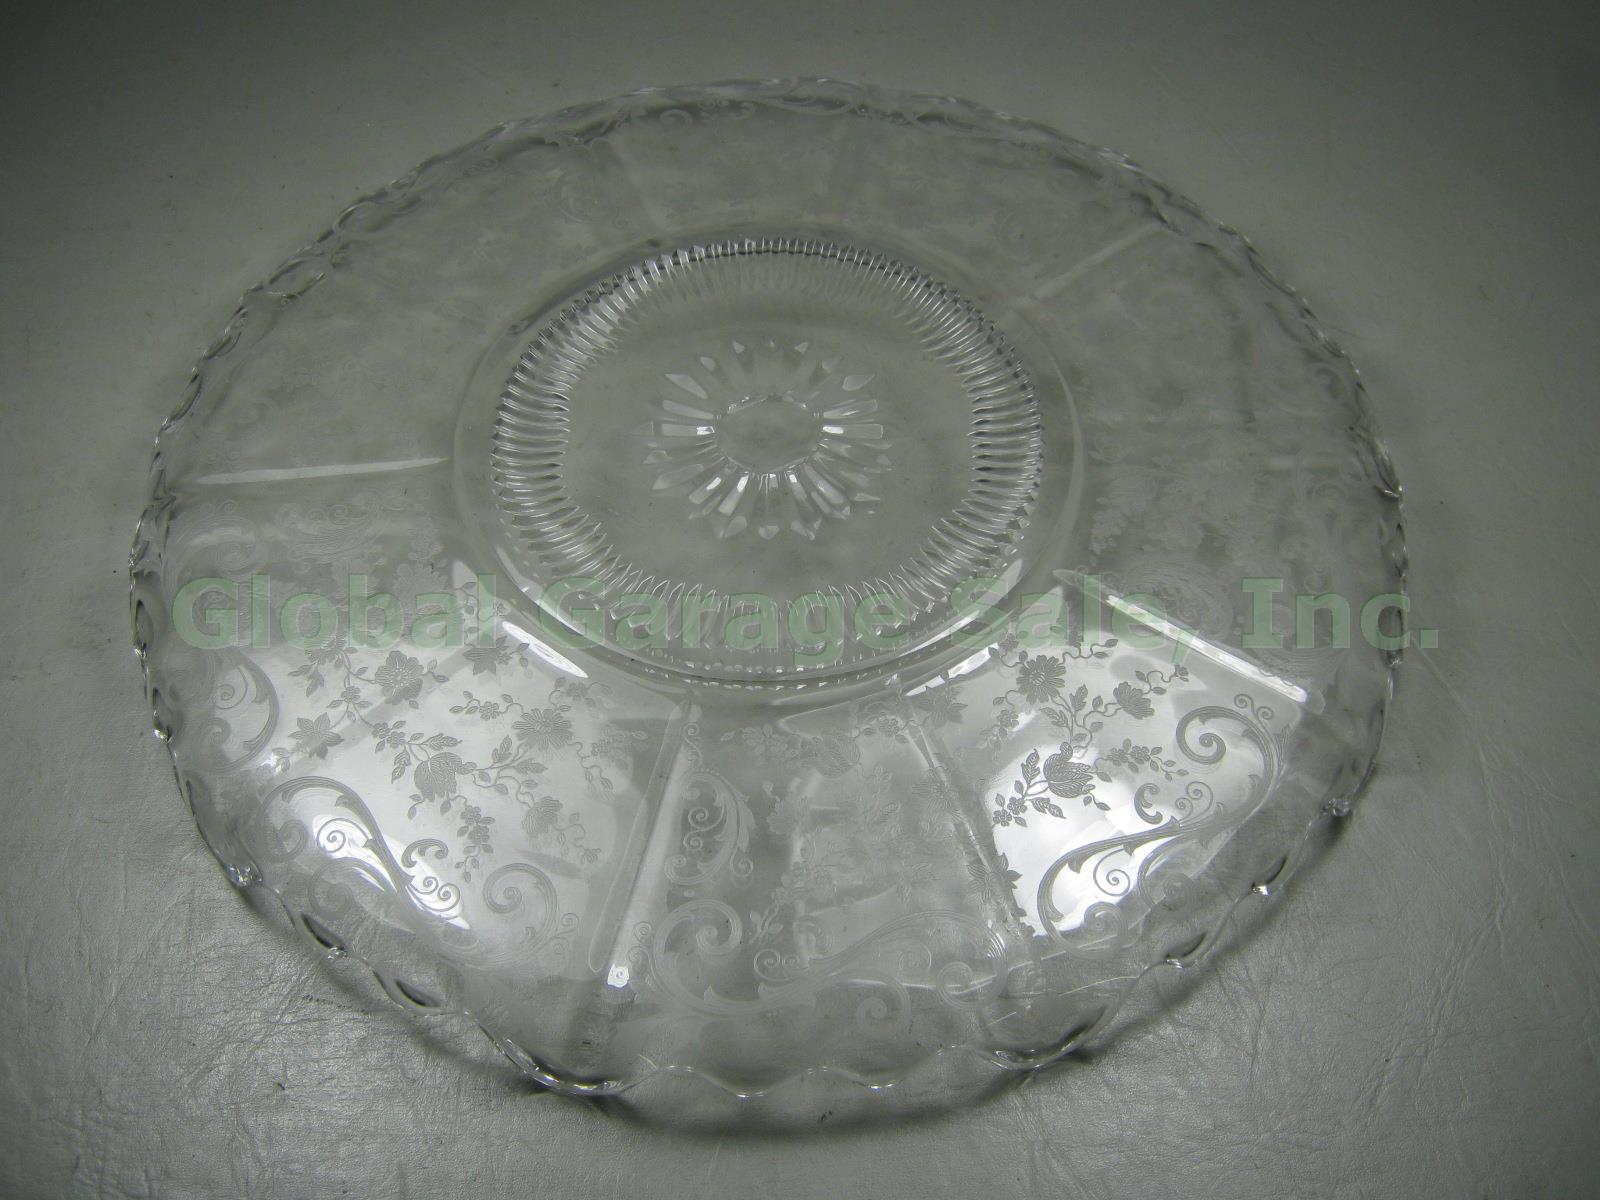 Cambridge Chantilly Etched Glass Serving Bowl Dish Handled Cake Plate Platter NR 8